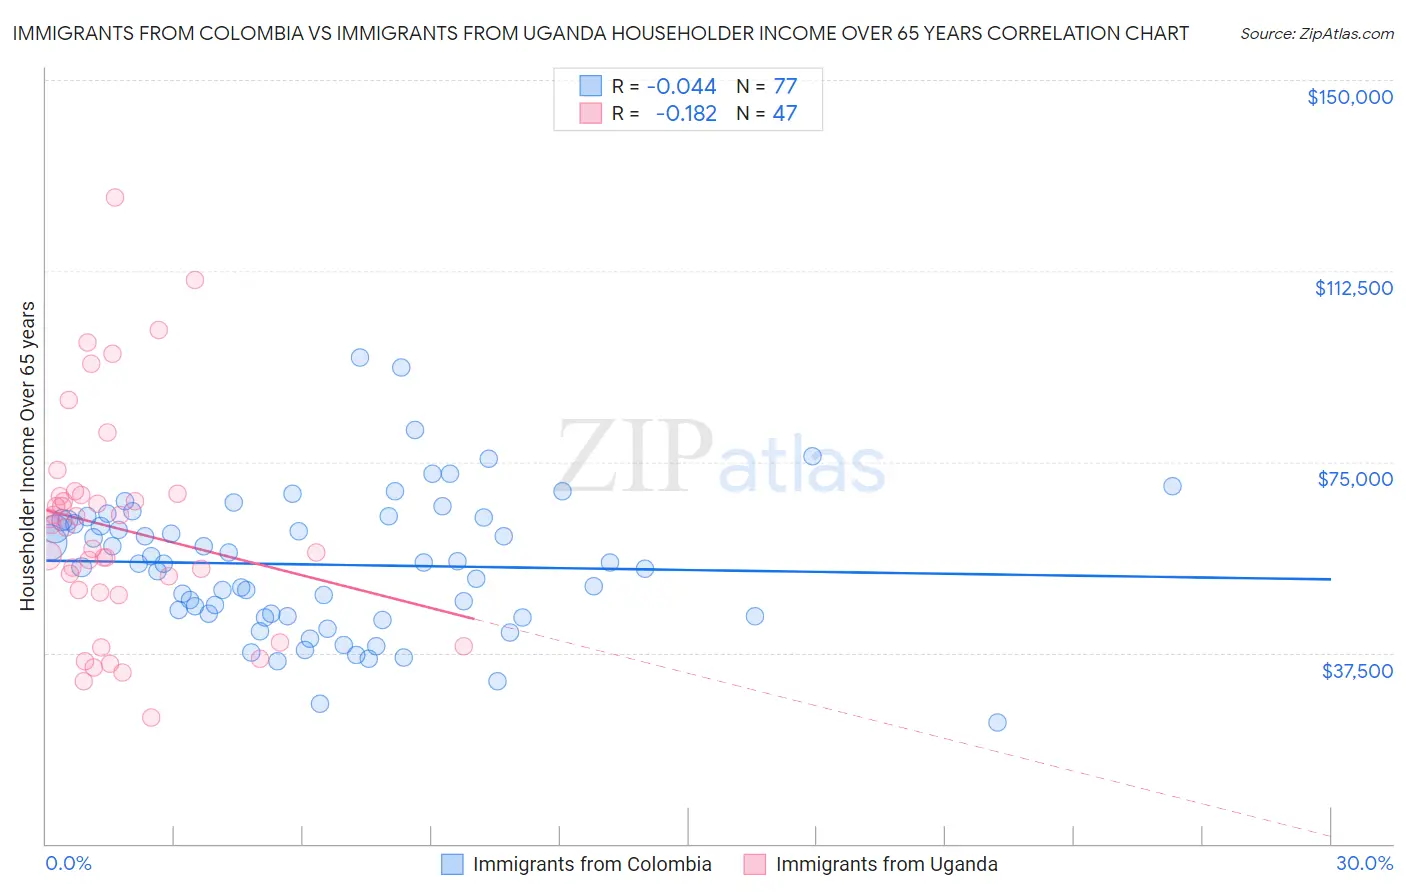 Immigrants from Colombia vs Immigrants from Uganda Householder Income Over 65 years